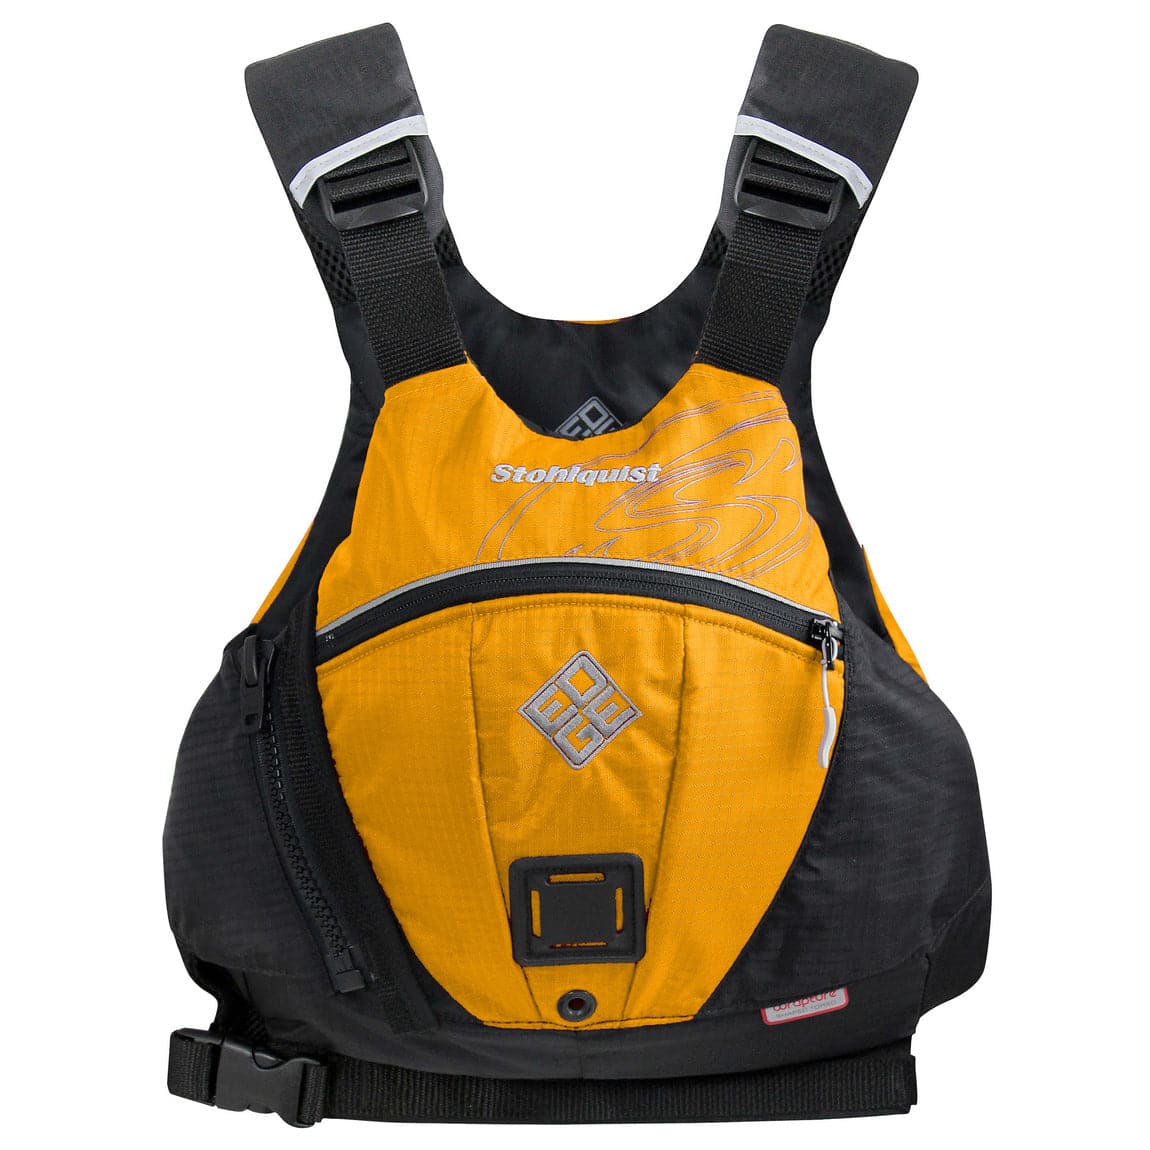 Featuring the Edge PFD men's pfd manufactured by Stohlquist shown here from a fifth angle.